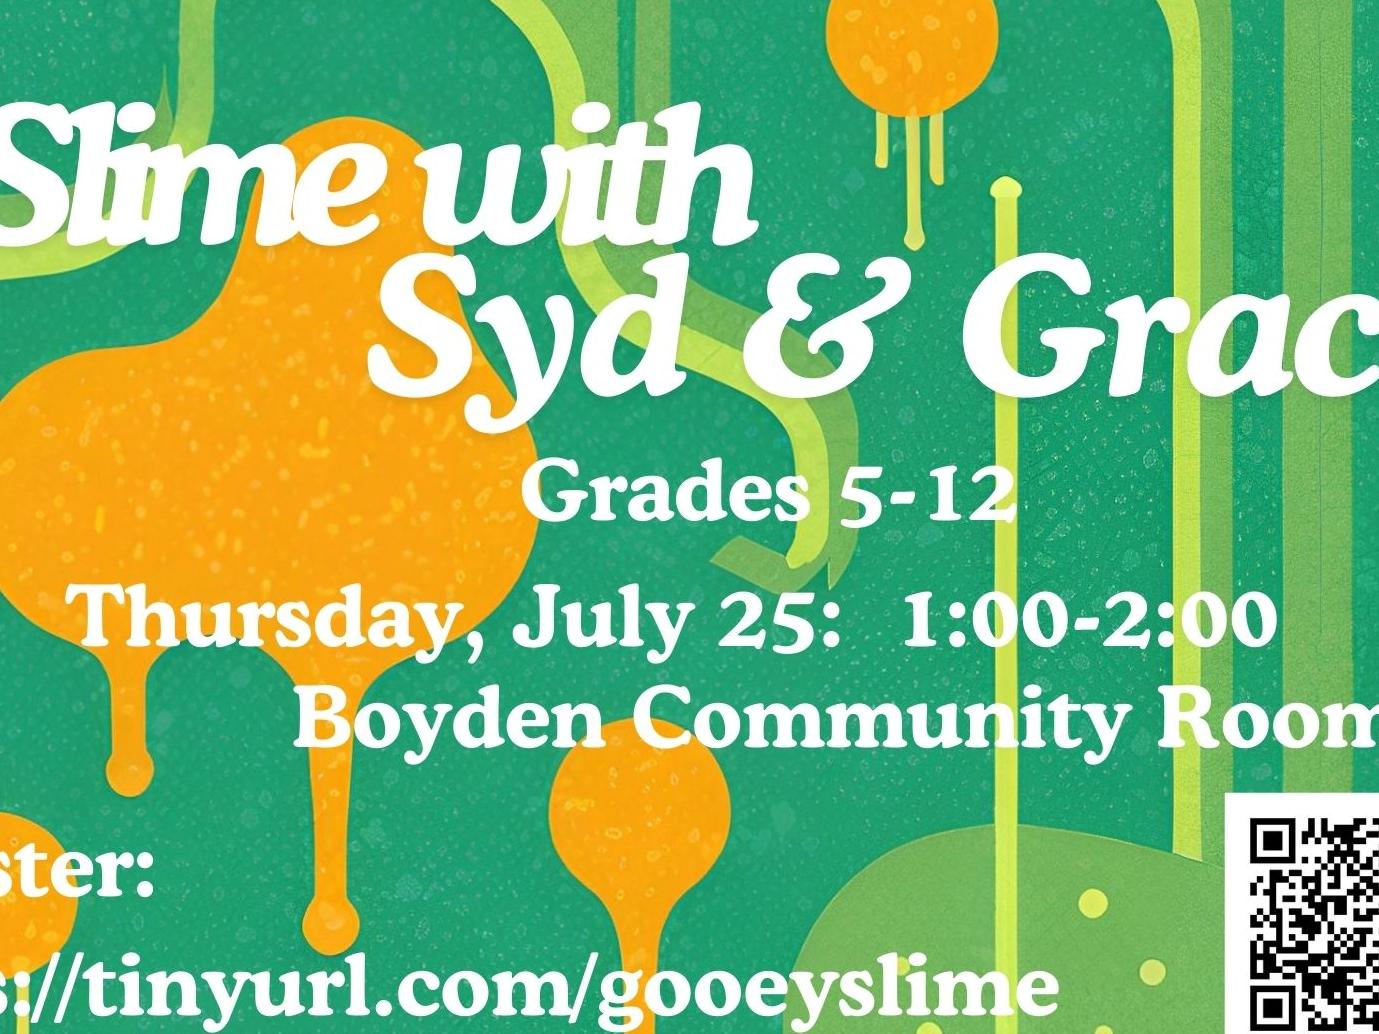 Slime with Syd & Grace, Grades 5-12